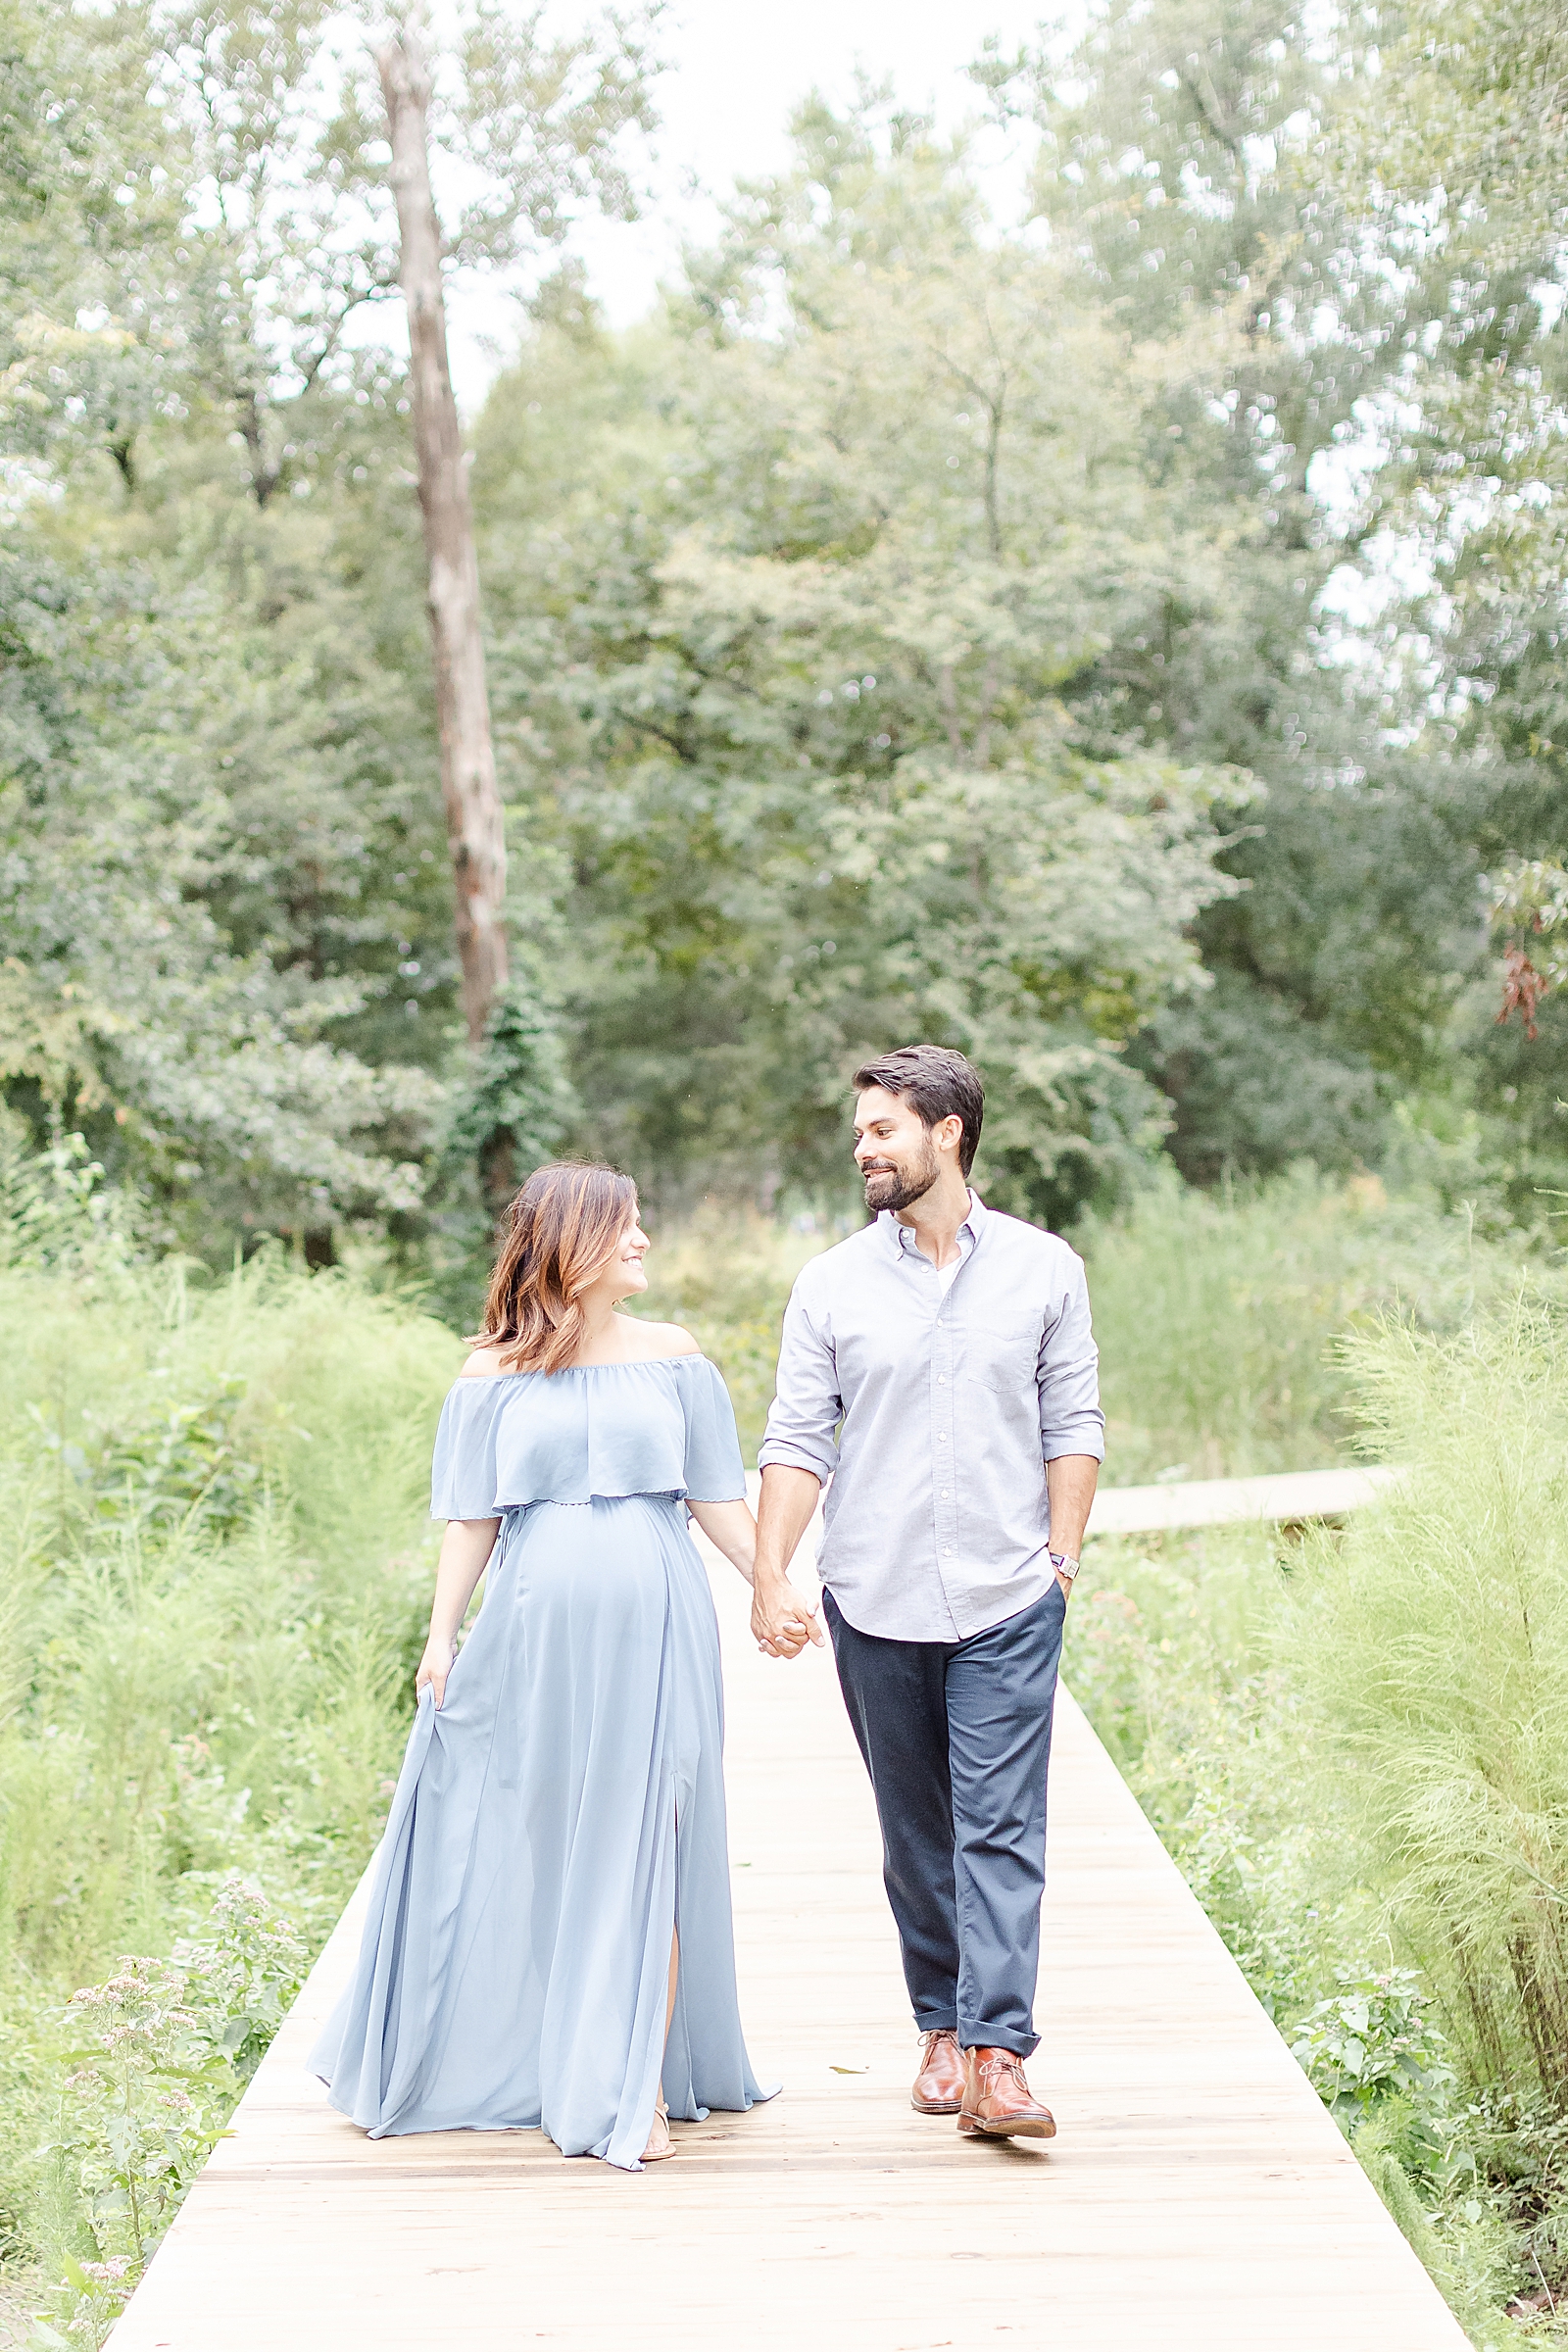 pregnant mom and husband walking down wooded pathway holding hands and smiling at each other while mom wears a blue gown at maternity session